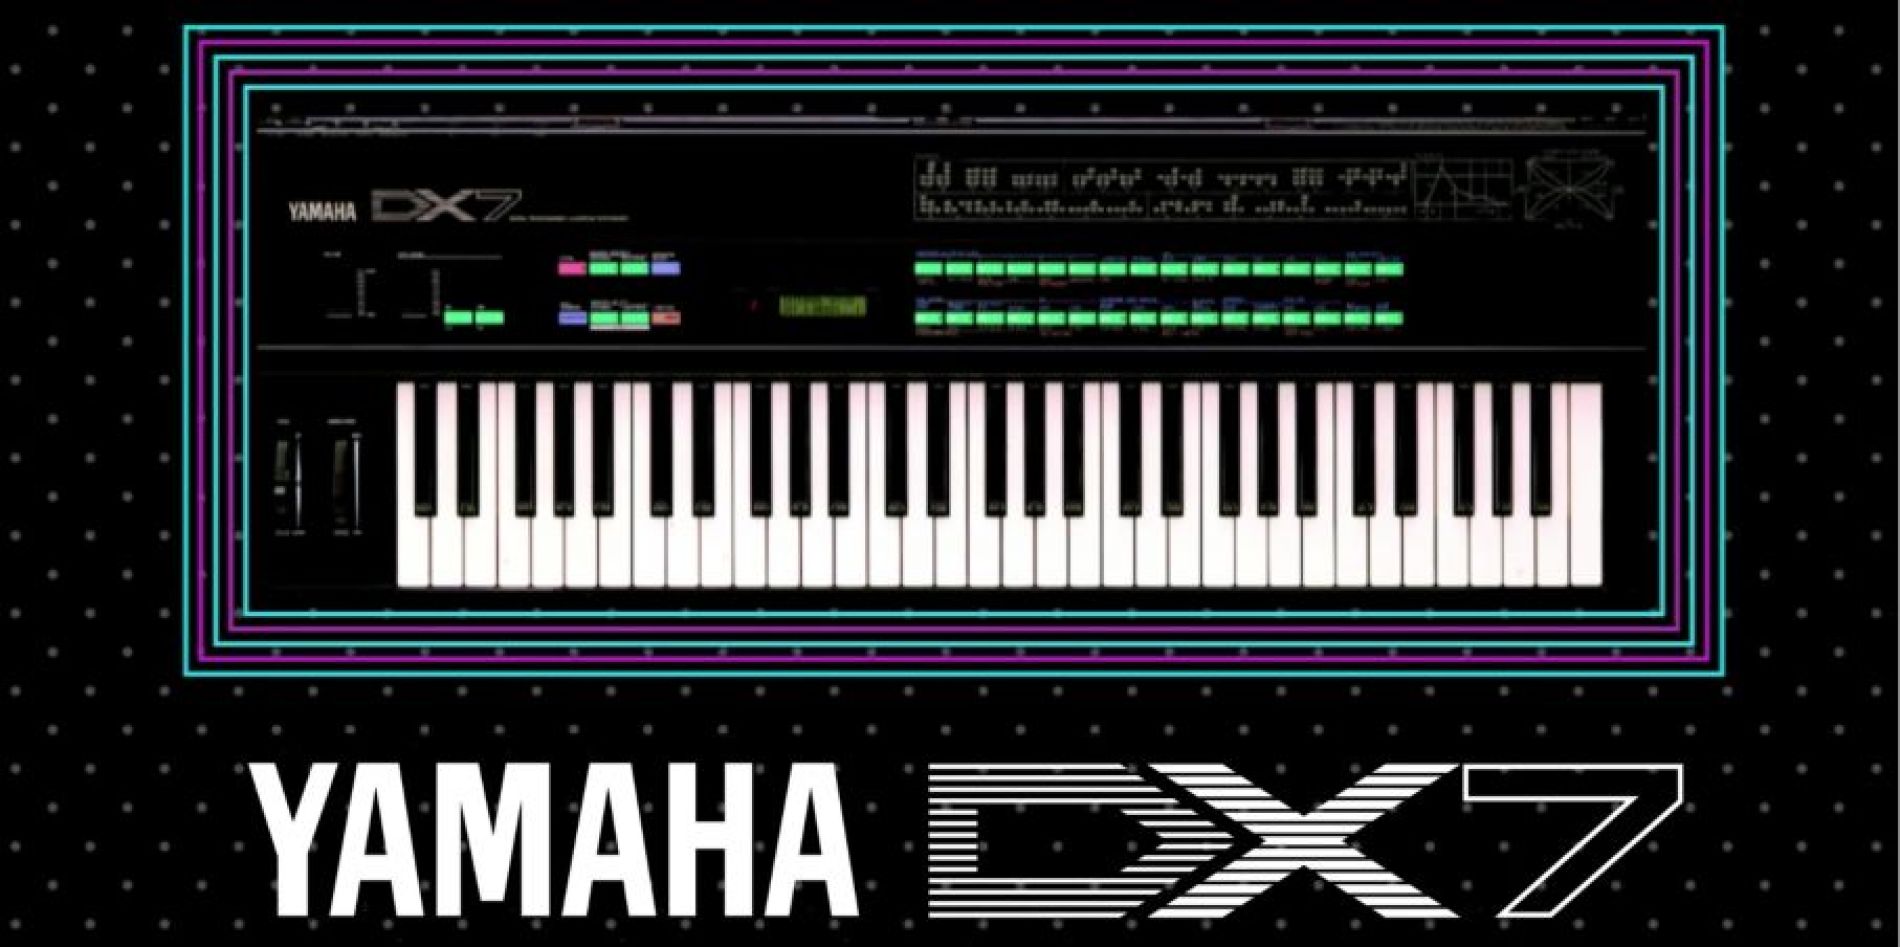 Synthbits: Yamaha DX7 - The Synthesizer that Defined the 80s - Synth